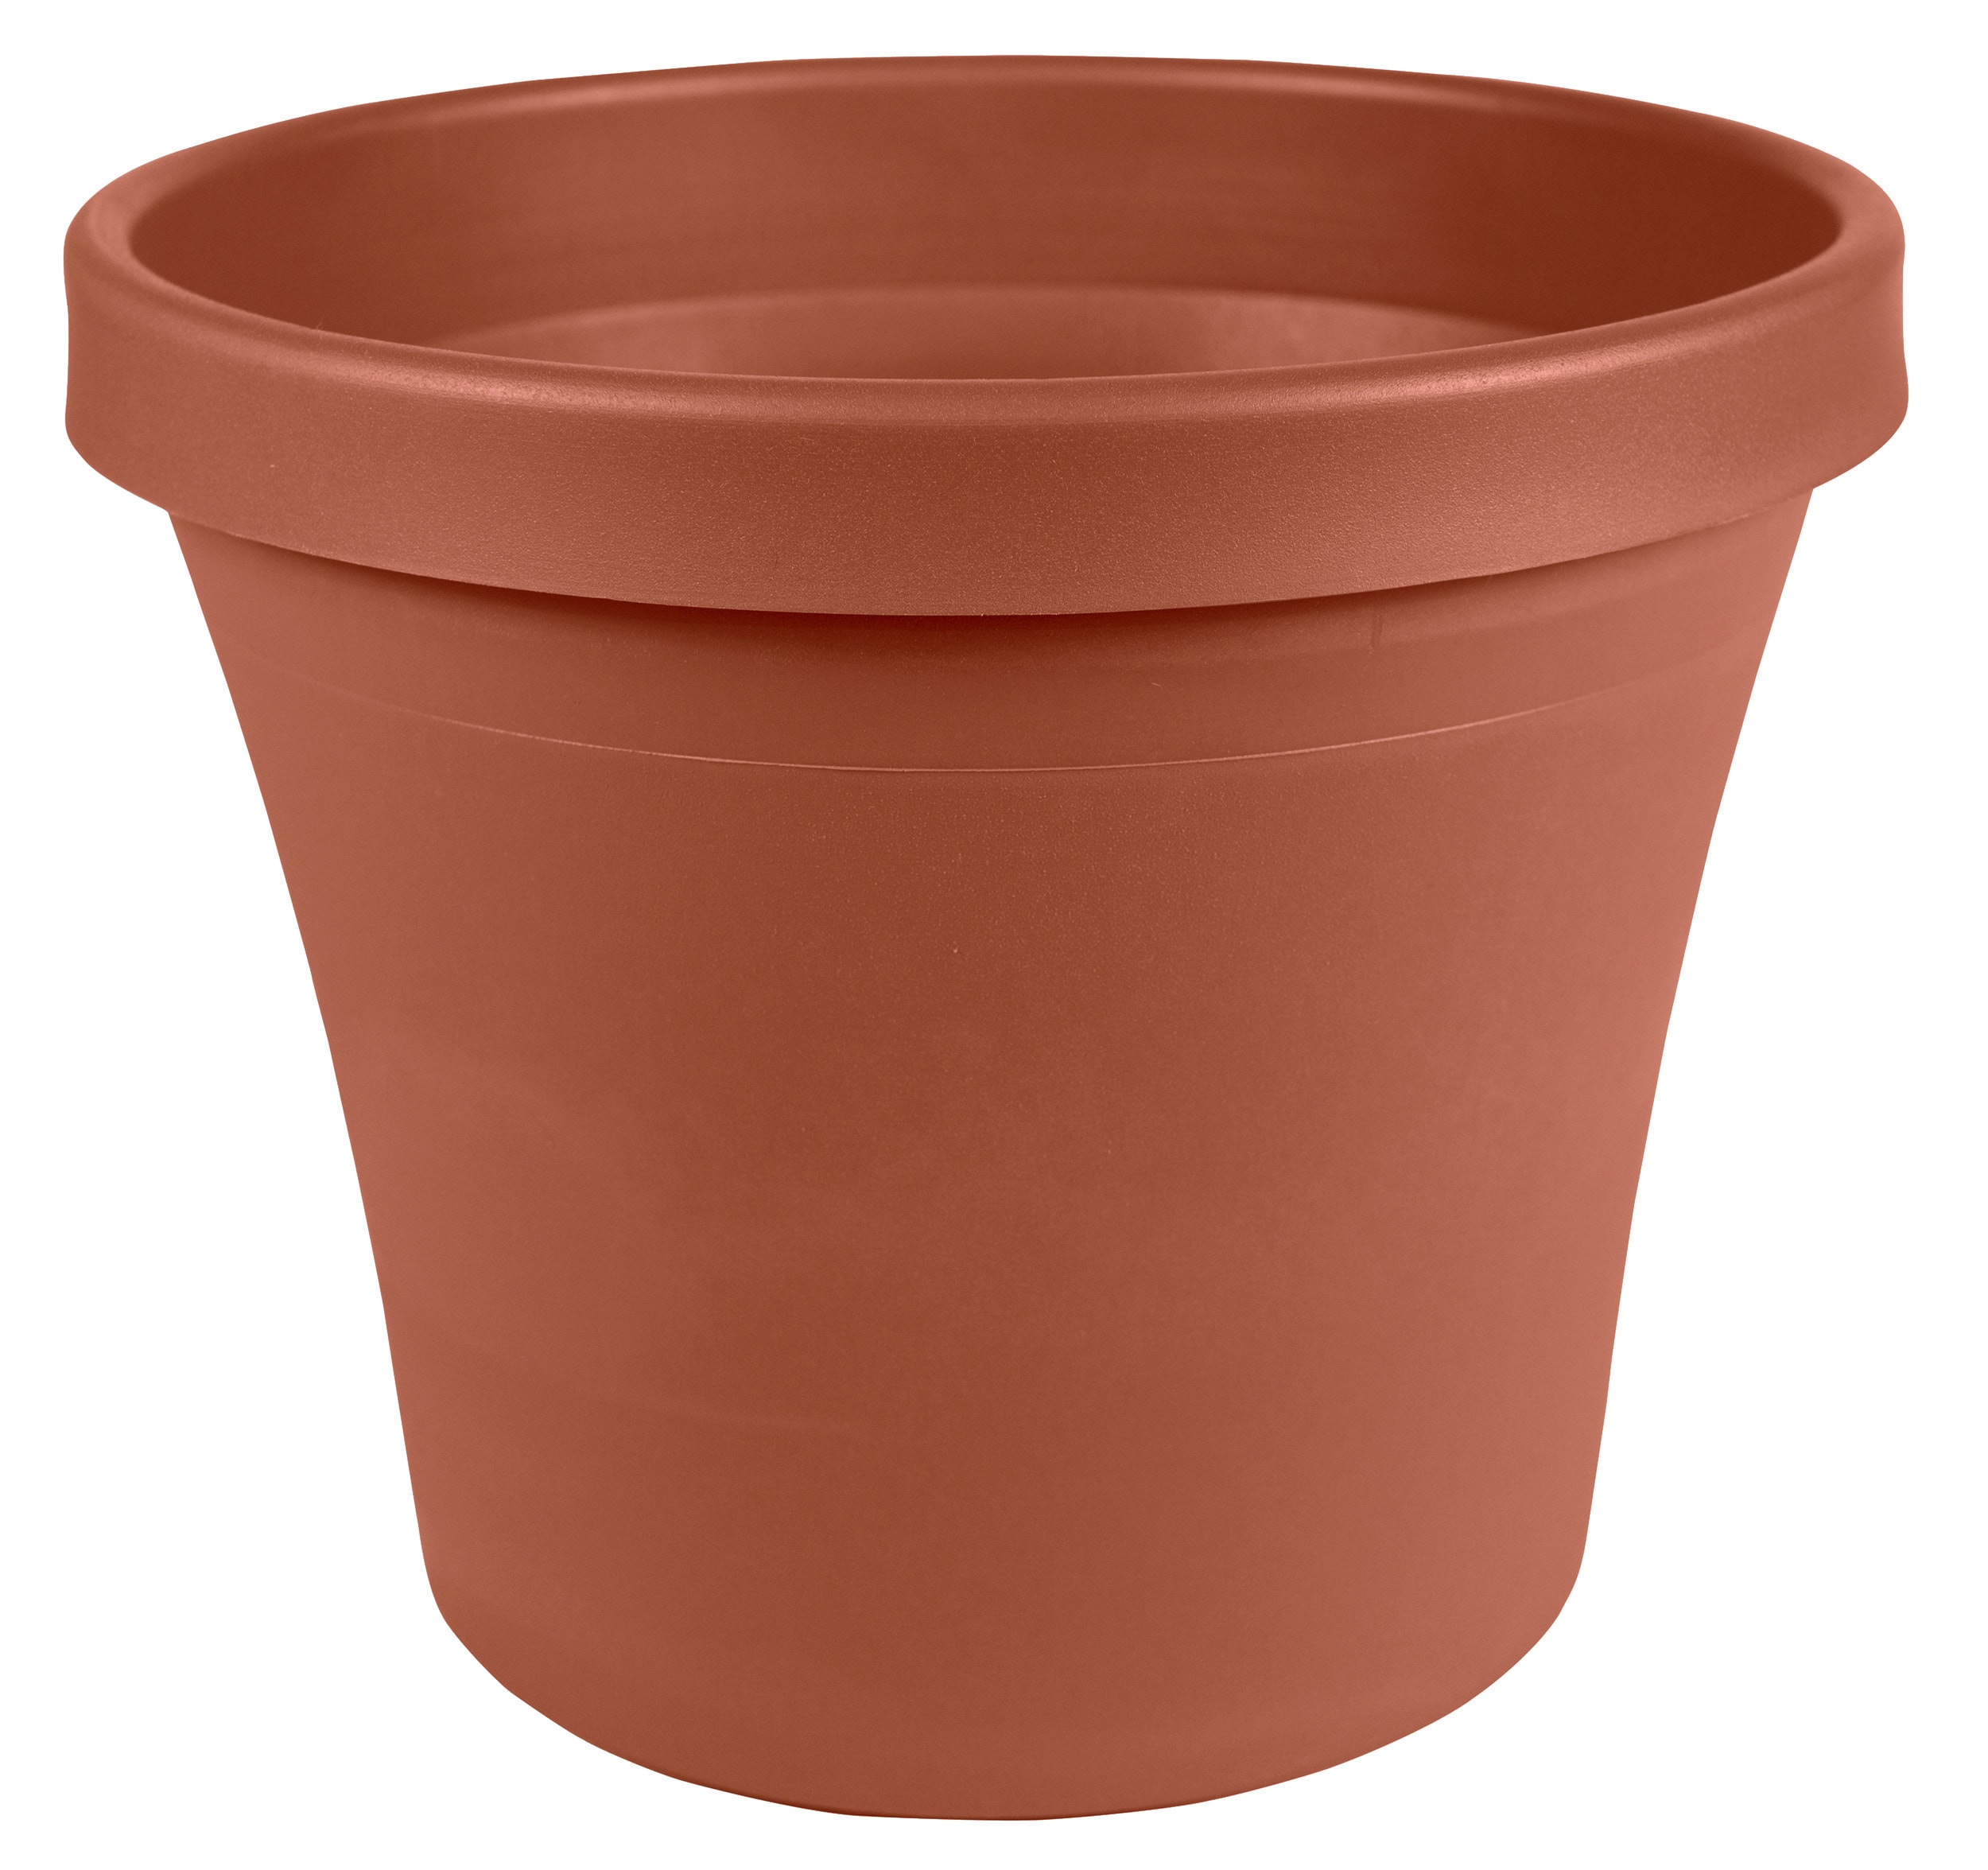 Aanwezigheid Middellandse Zee Feat Bloem 15-in x 12.75-in Terra Cotta Plastic Planter with Drainage Holes in  the Pots & Planters department at Lowes.com